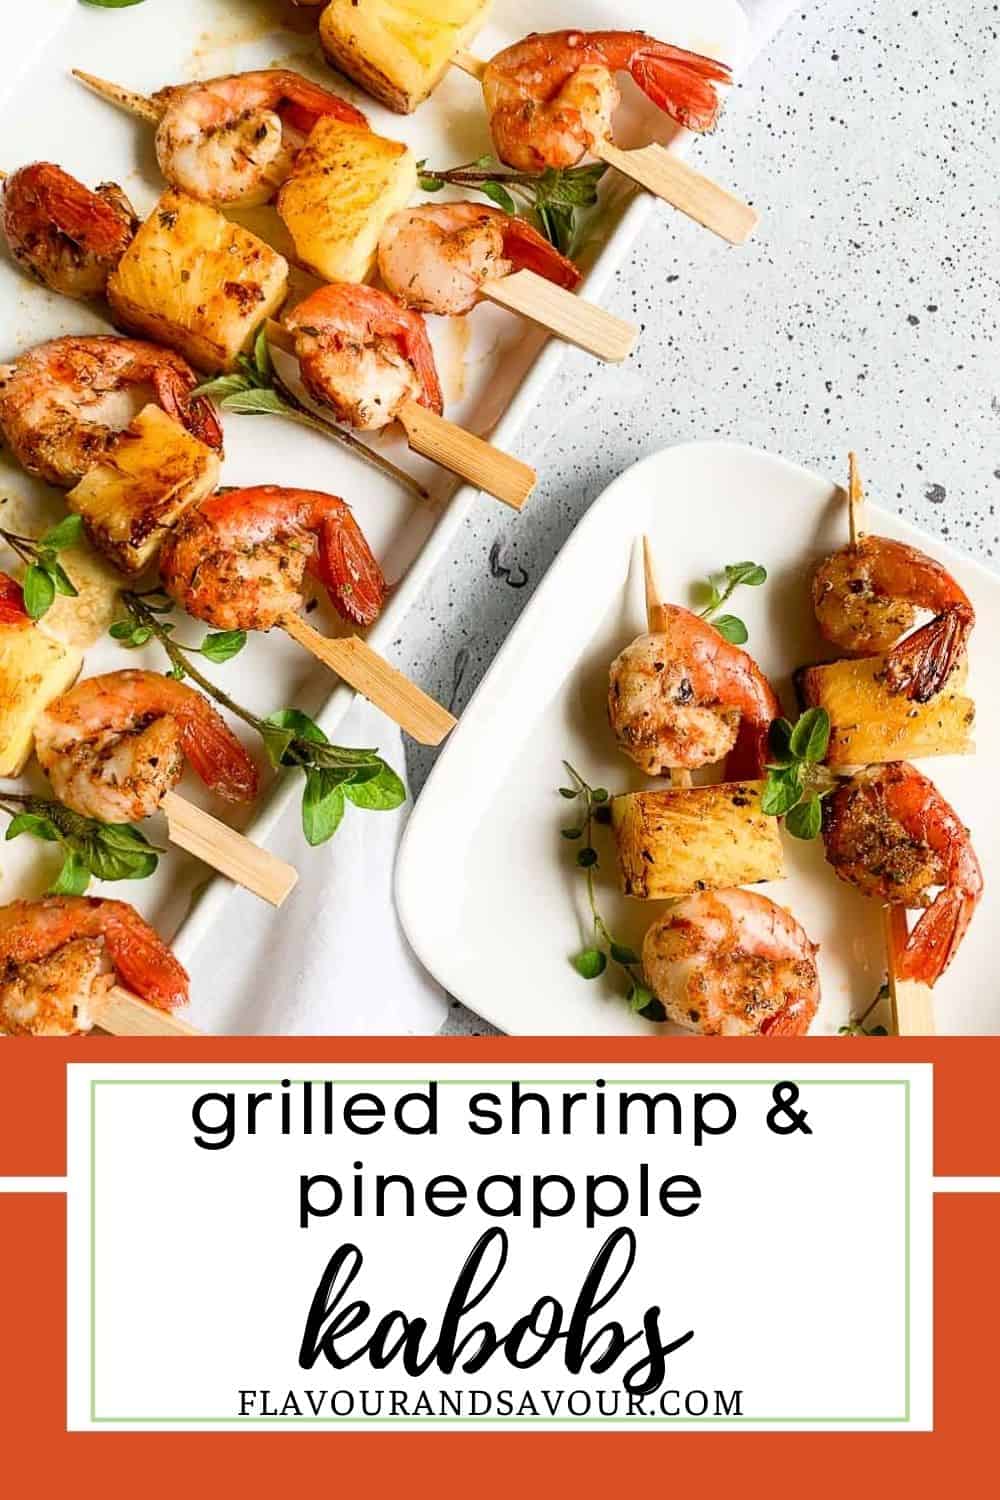 image with text for grilled cajun prawn and pineapple kabobs